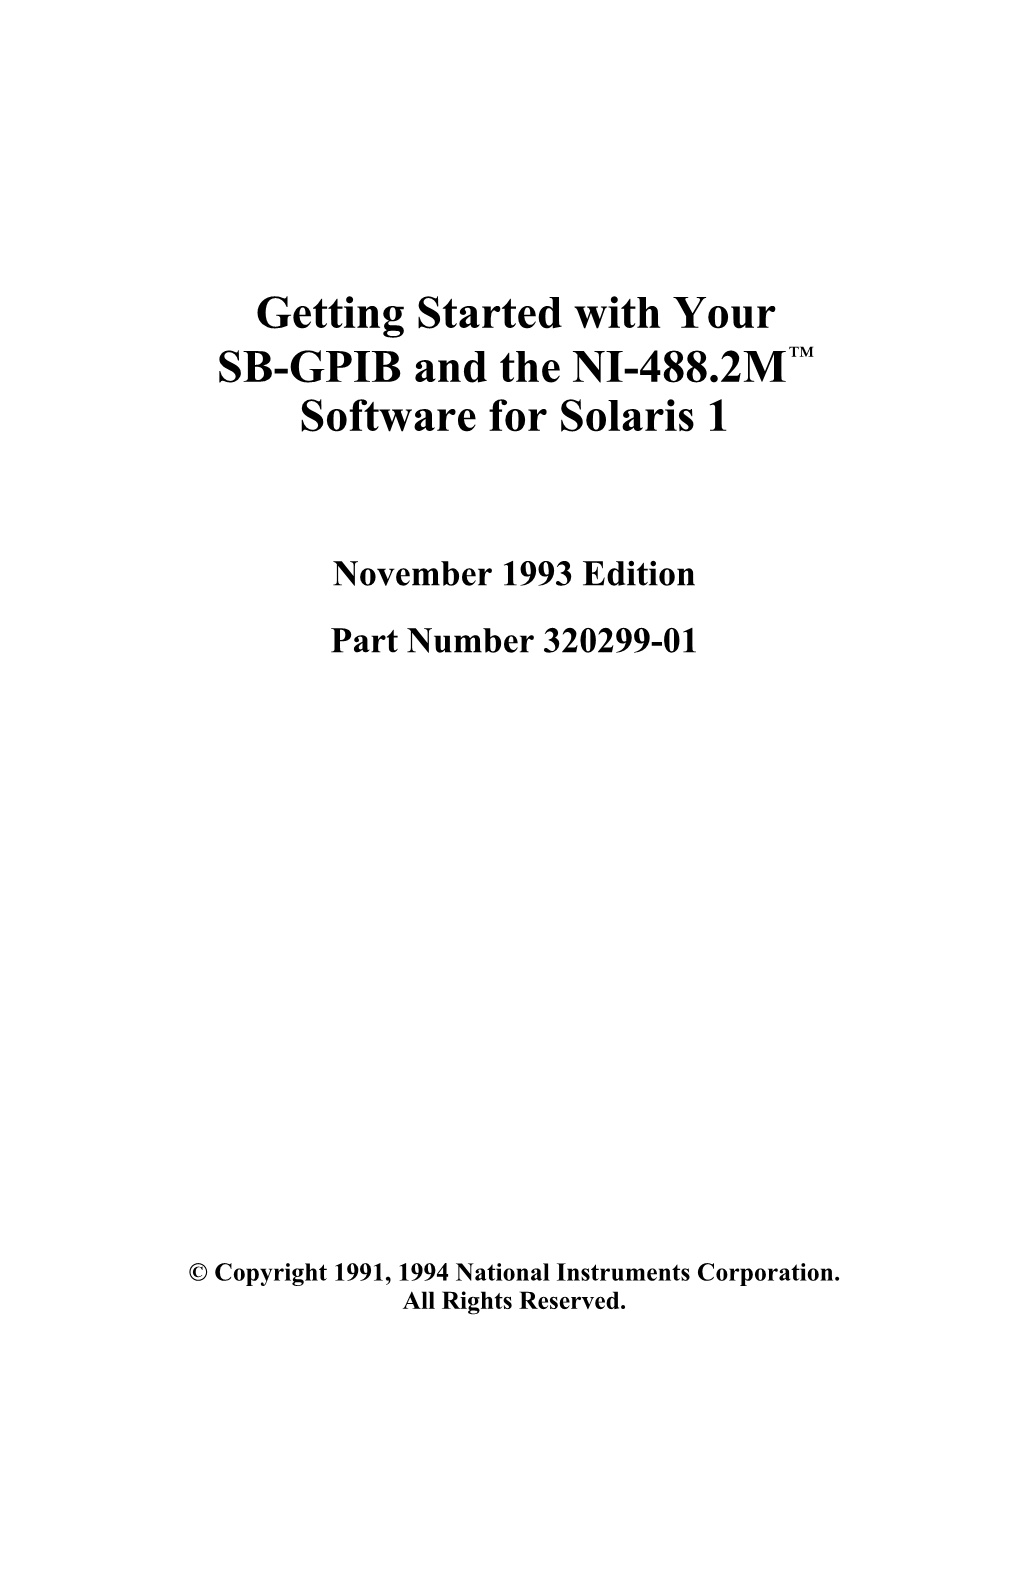 Archived: Getting Started with Your SB-GPIB and NI-488.2M for Solaris 1